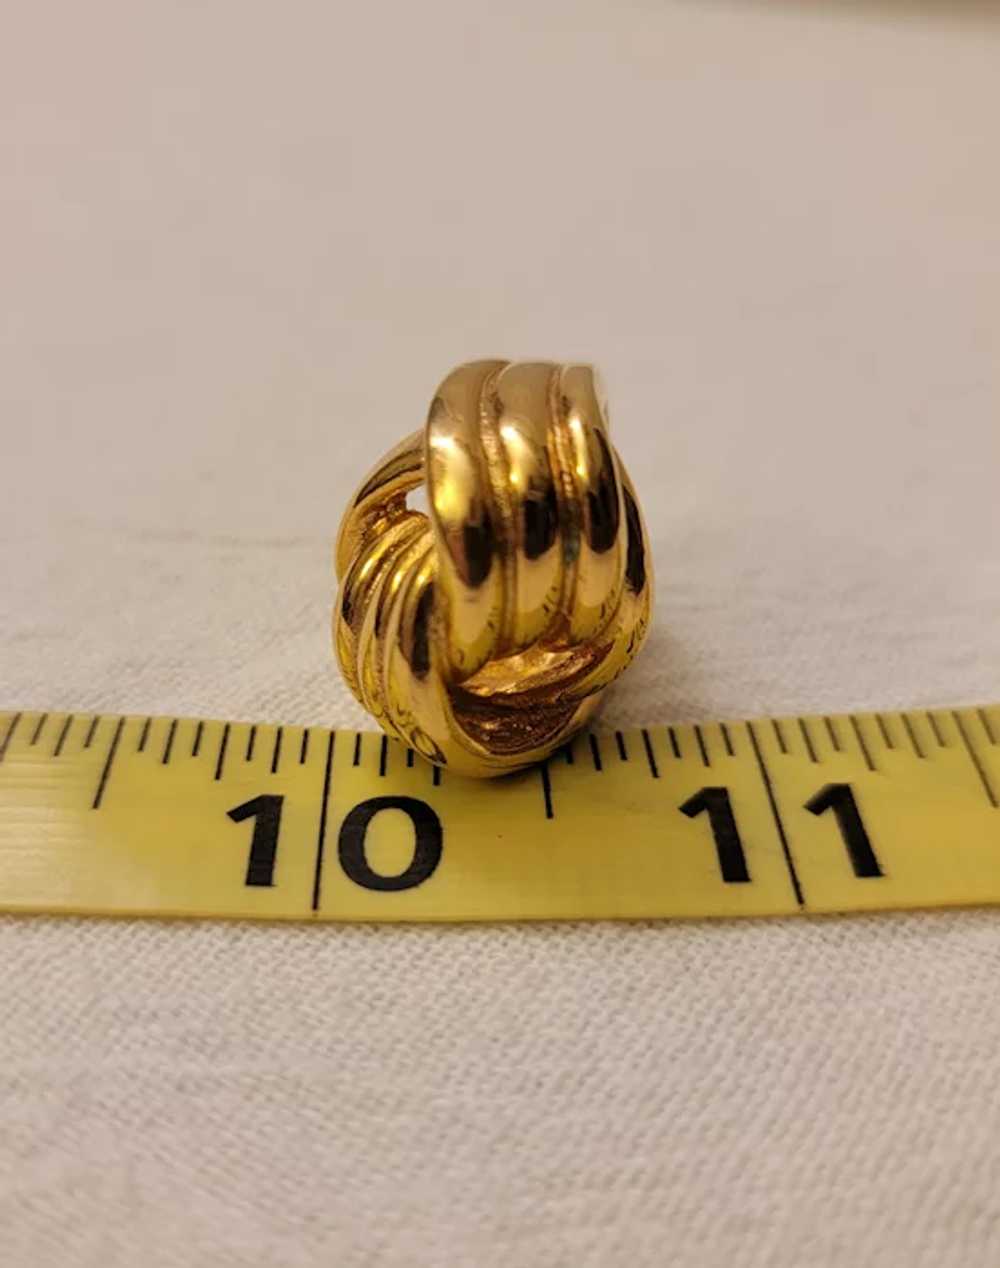 18Kt hge yellow gold ring, knot design - image 3